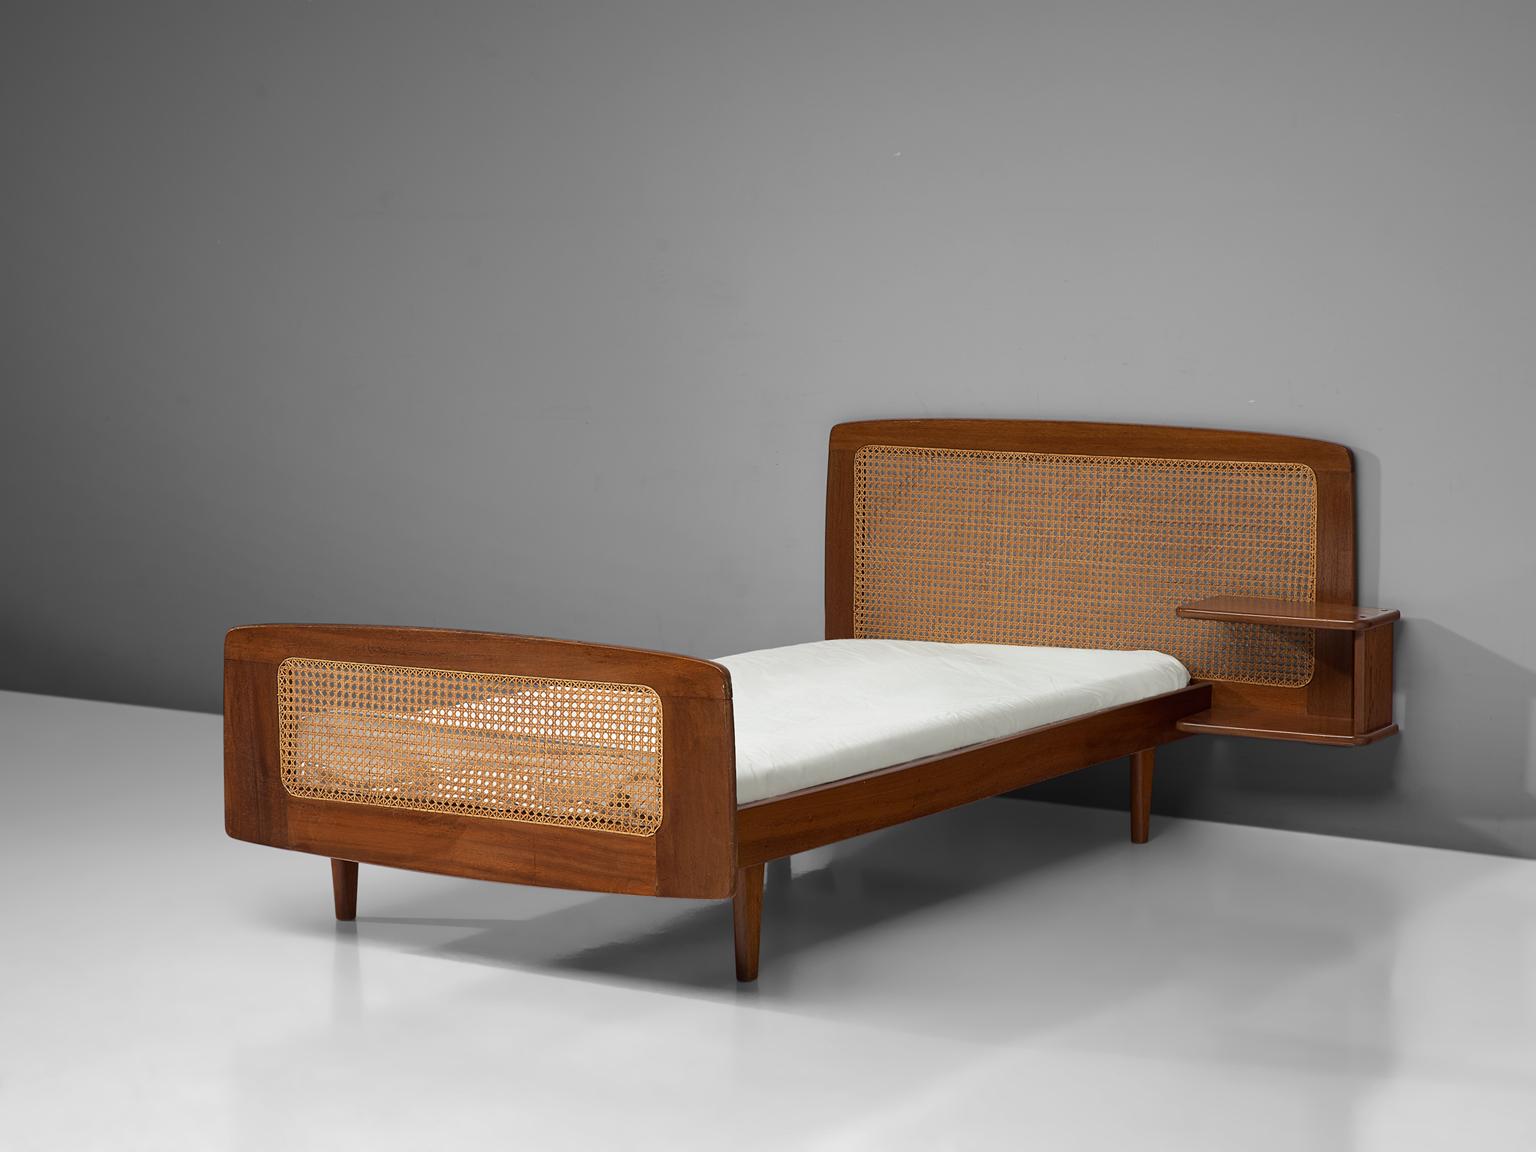 Attributed to Roger Landault, single bed, mahogany and cane, France, 1950s

French Post-War reconstruction single bed attribute to Roger Landault. The bed is made of mahogany and features a headboard and footboard made with cane. Shelves are